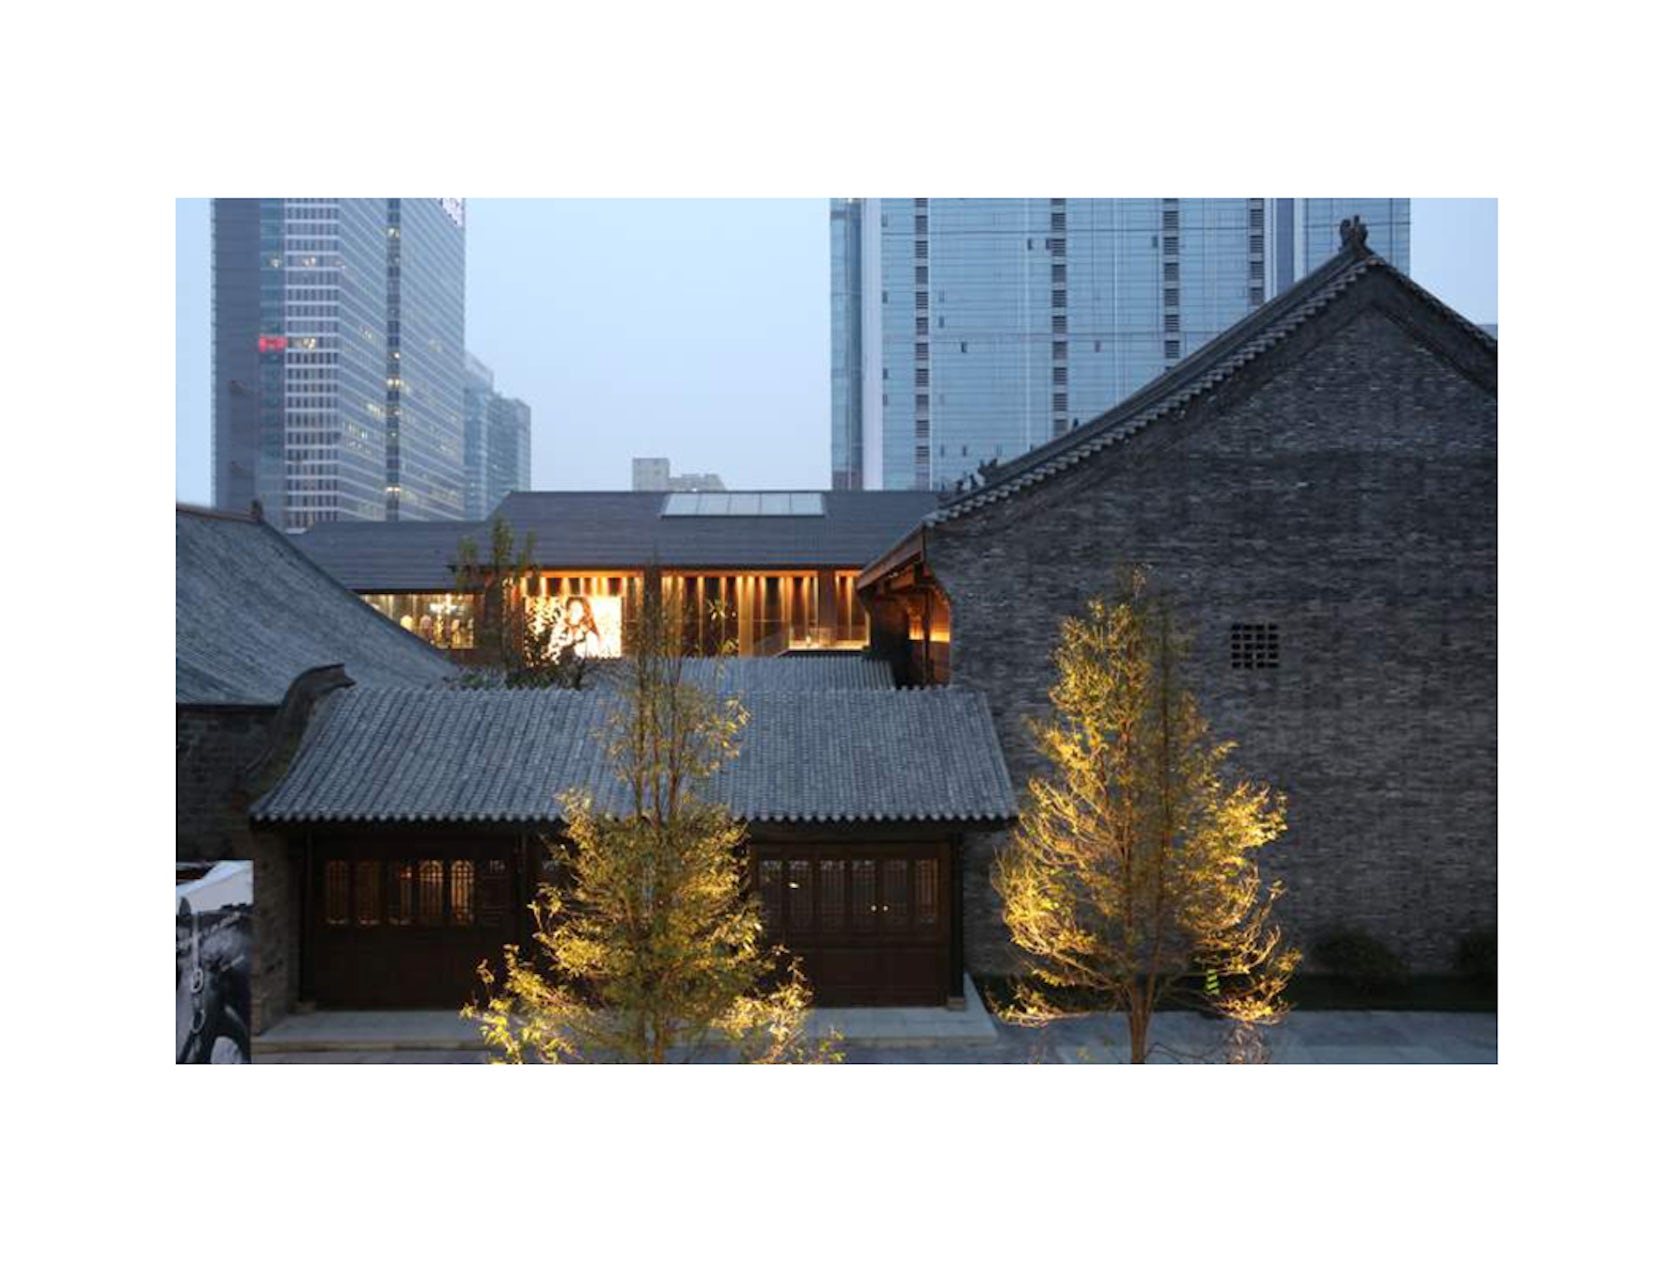 Sino-Ocean Taikoo Li Chengdu Offers Cultural Outlook For 8th Anniversary  Exhibition